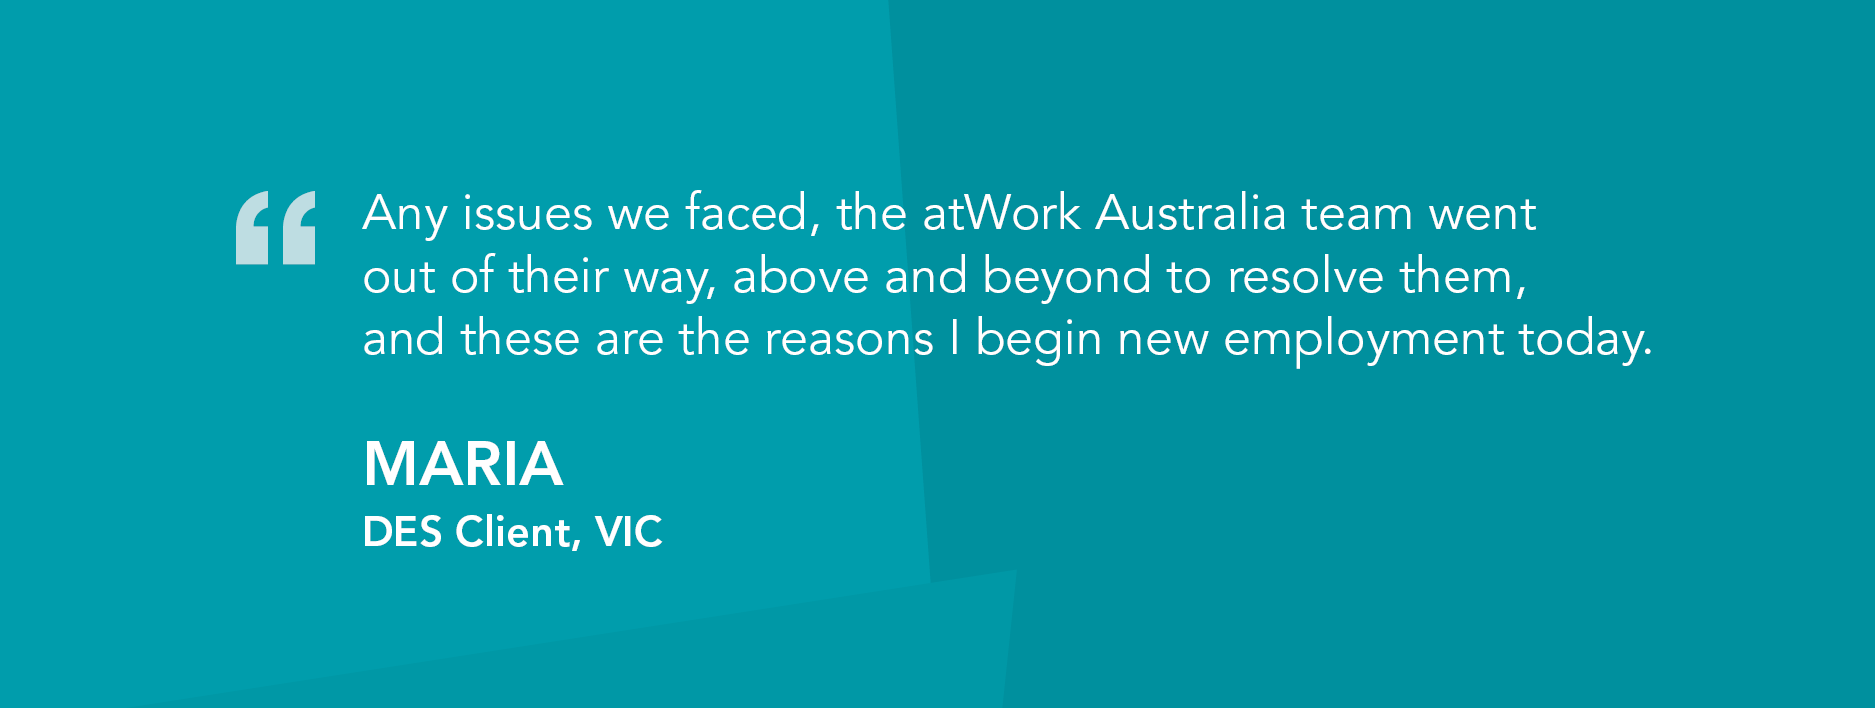 Any issues we faced, the atWork Australia team went out of their way, above and beyond to resolve them, and these are the reasons I begin new employment today." Maria, DES Client, VIC